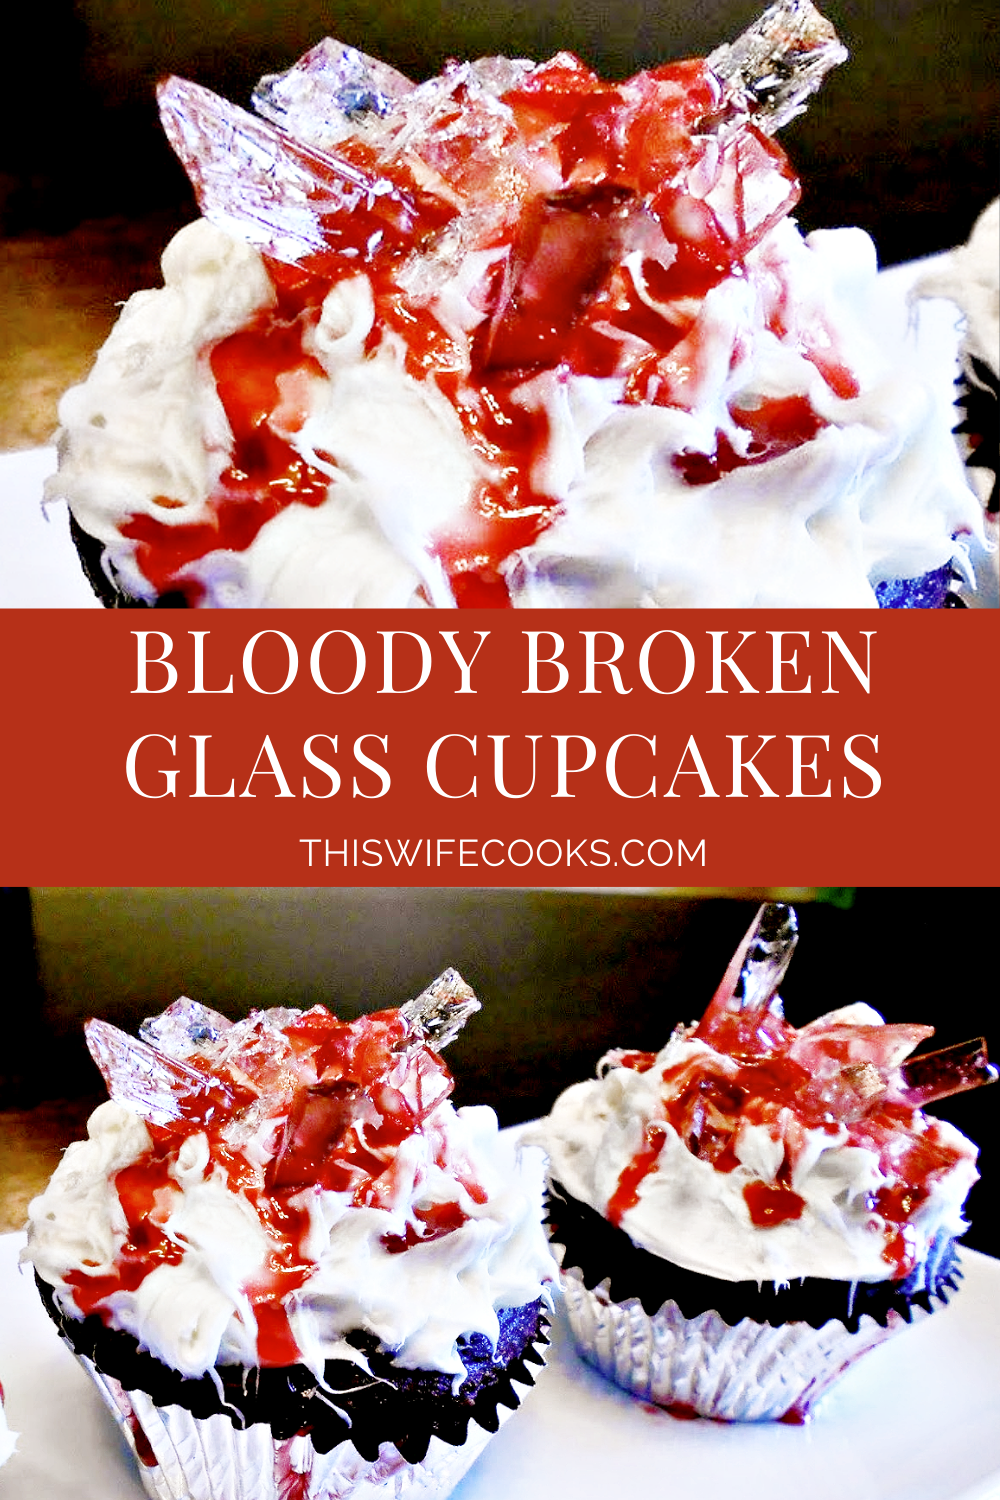 Frosted cupcakes decorated with edible homemade sugar-based "broken glass" and edible "blood." Easy to make and perfect for a Halloween party!  via @thiswifecooks